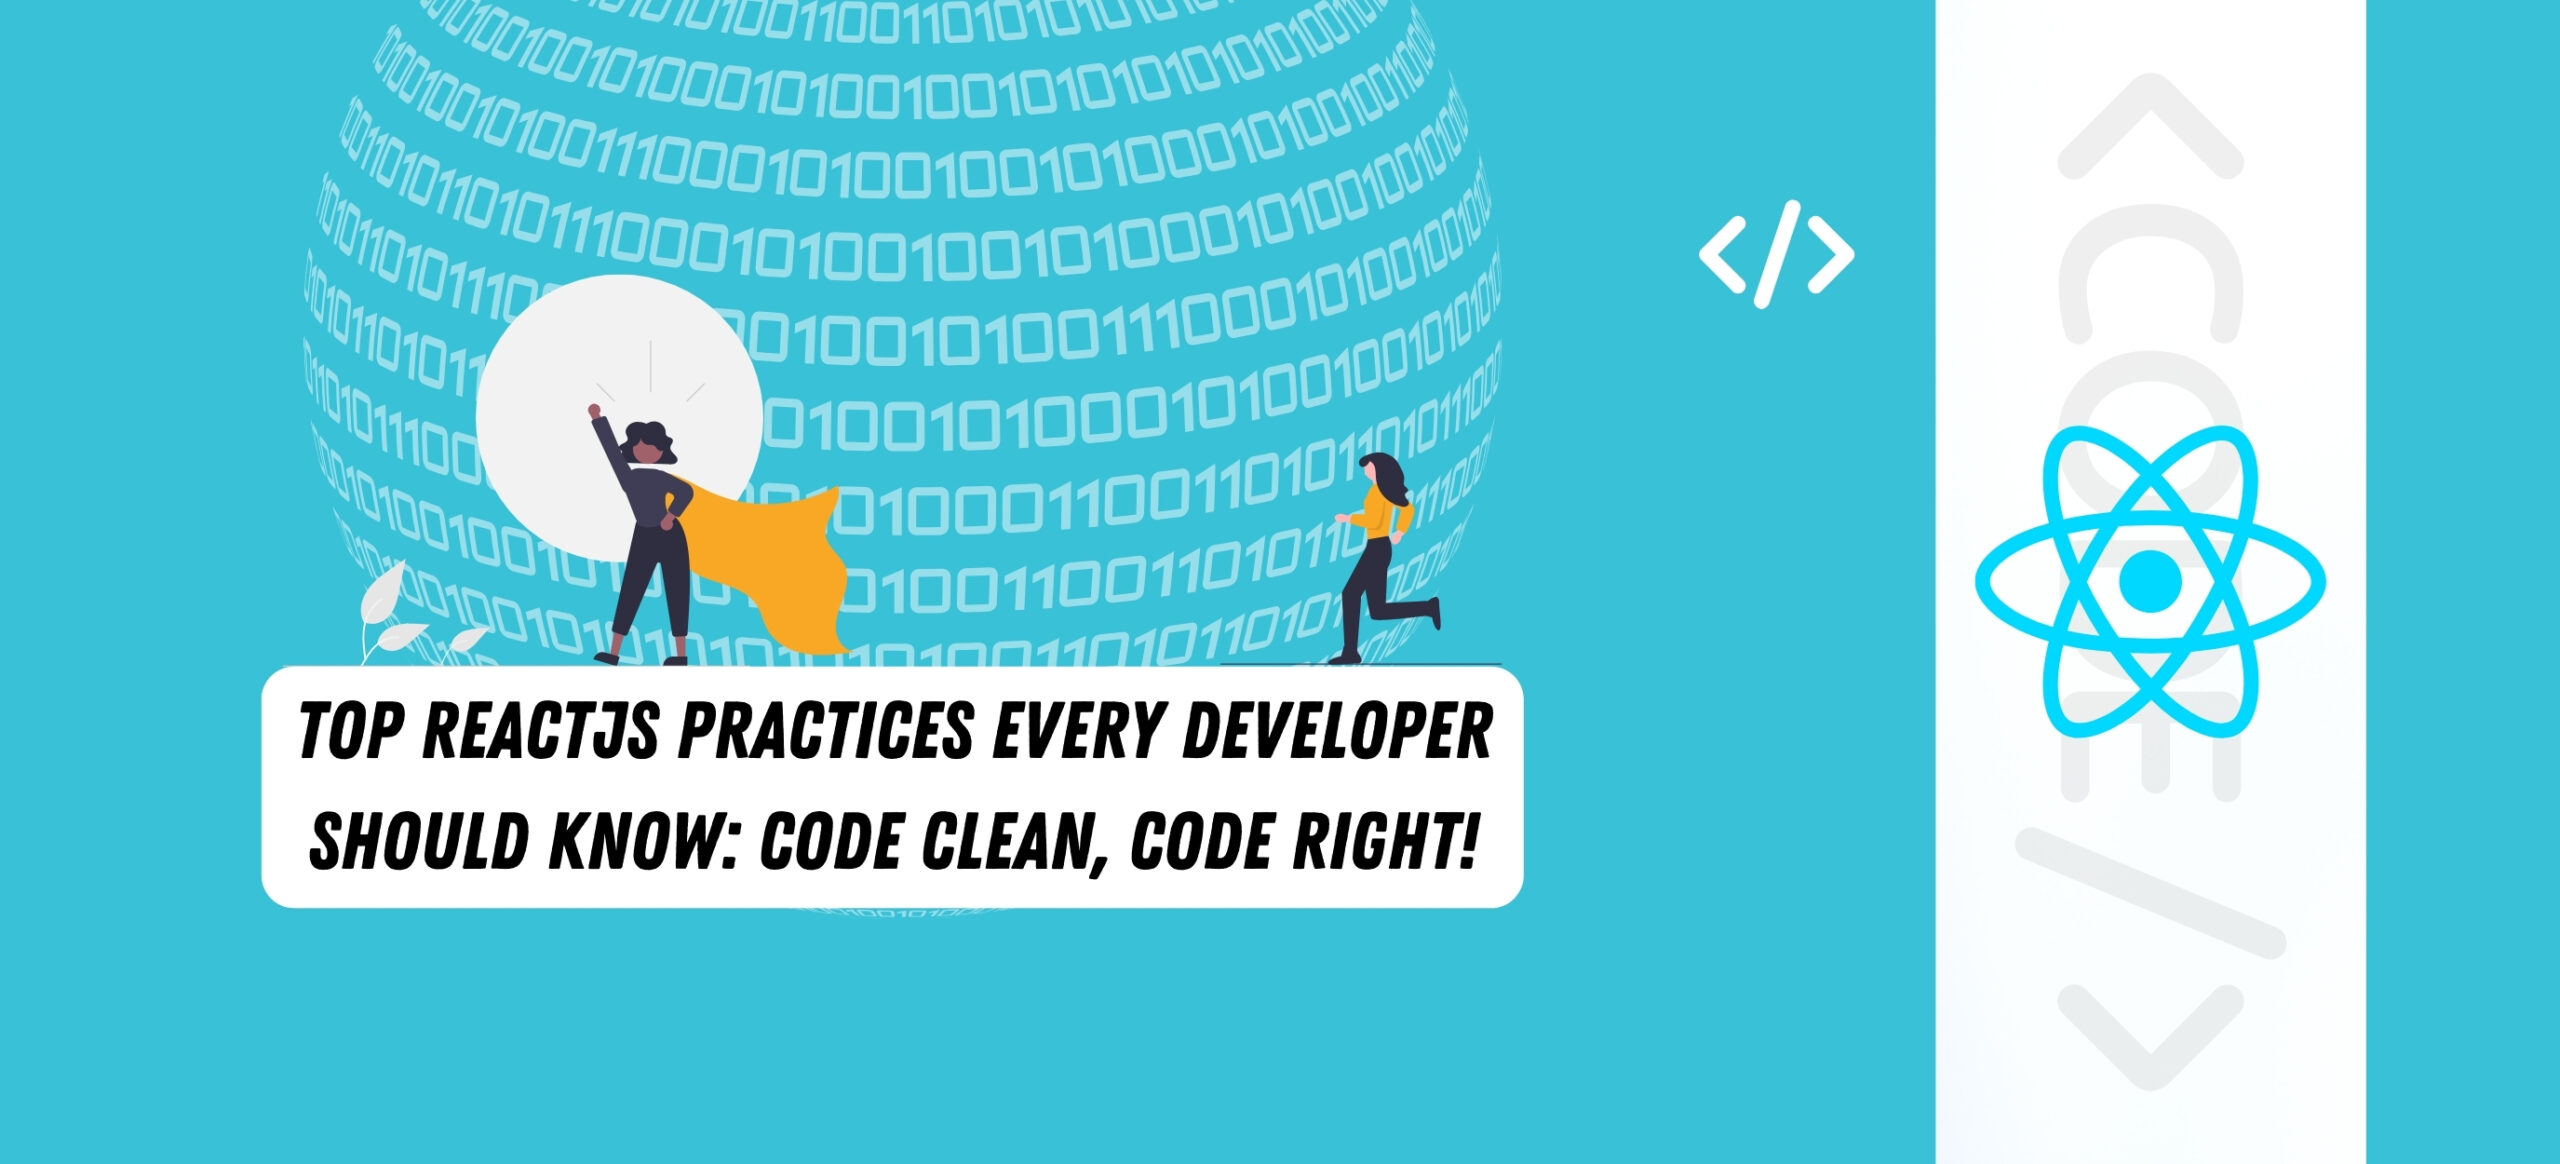 Top ReactJS Practices Every Developer Should Know: Code Clean, Code Right!